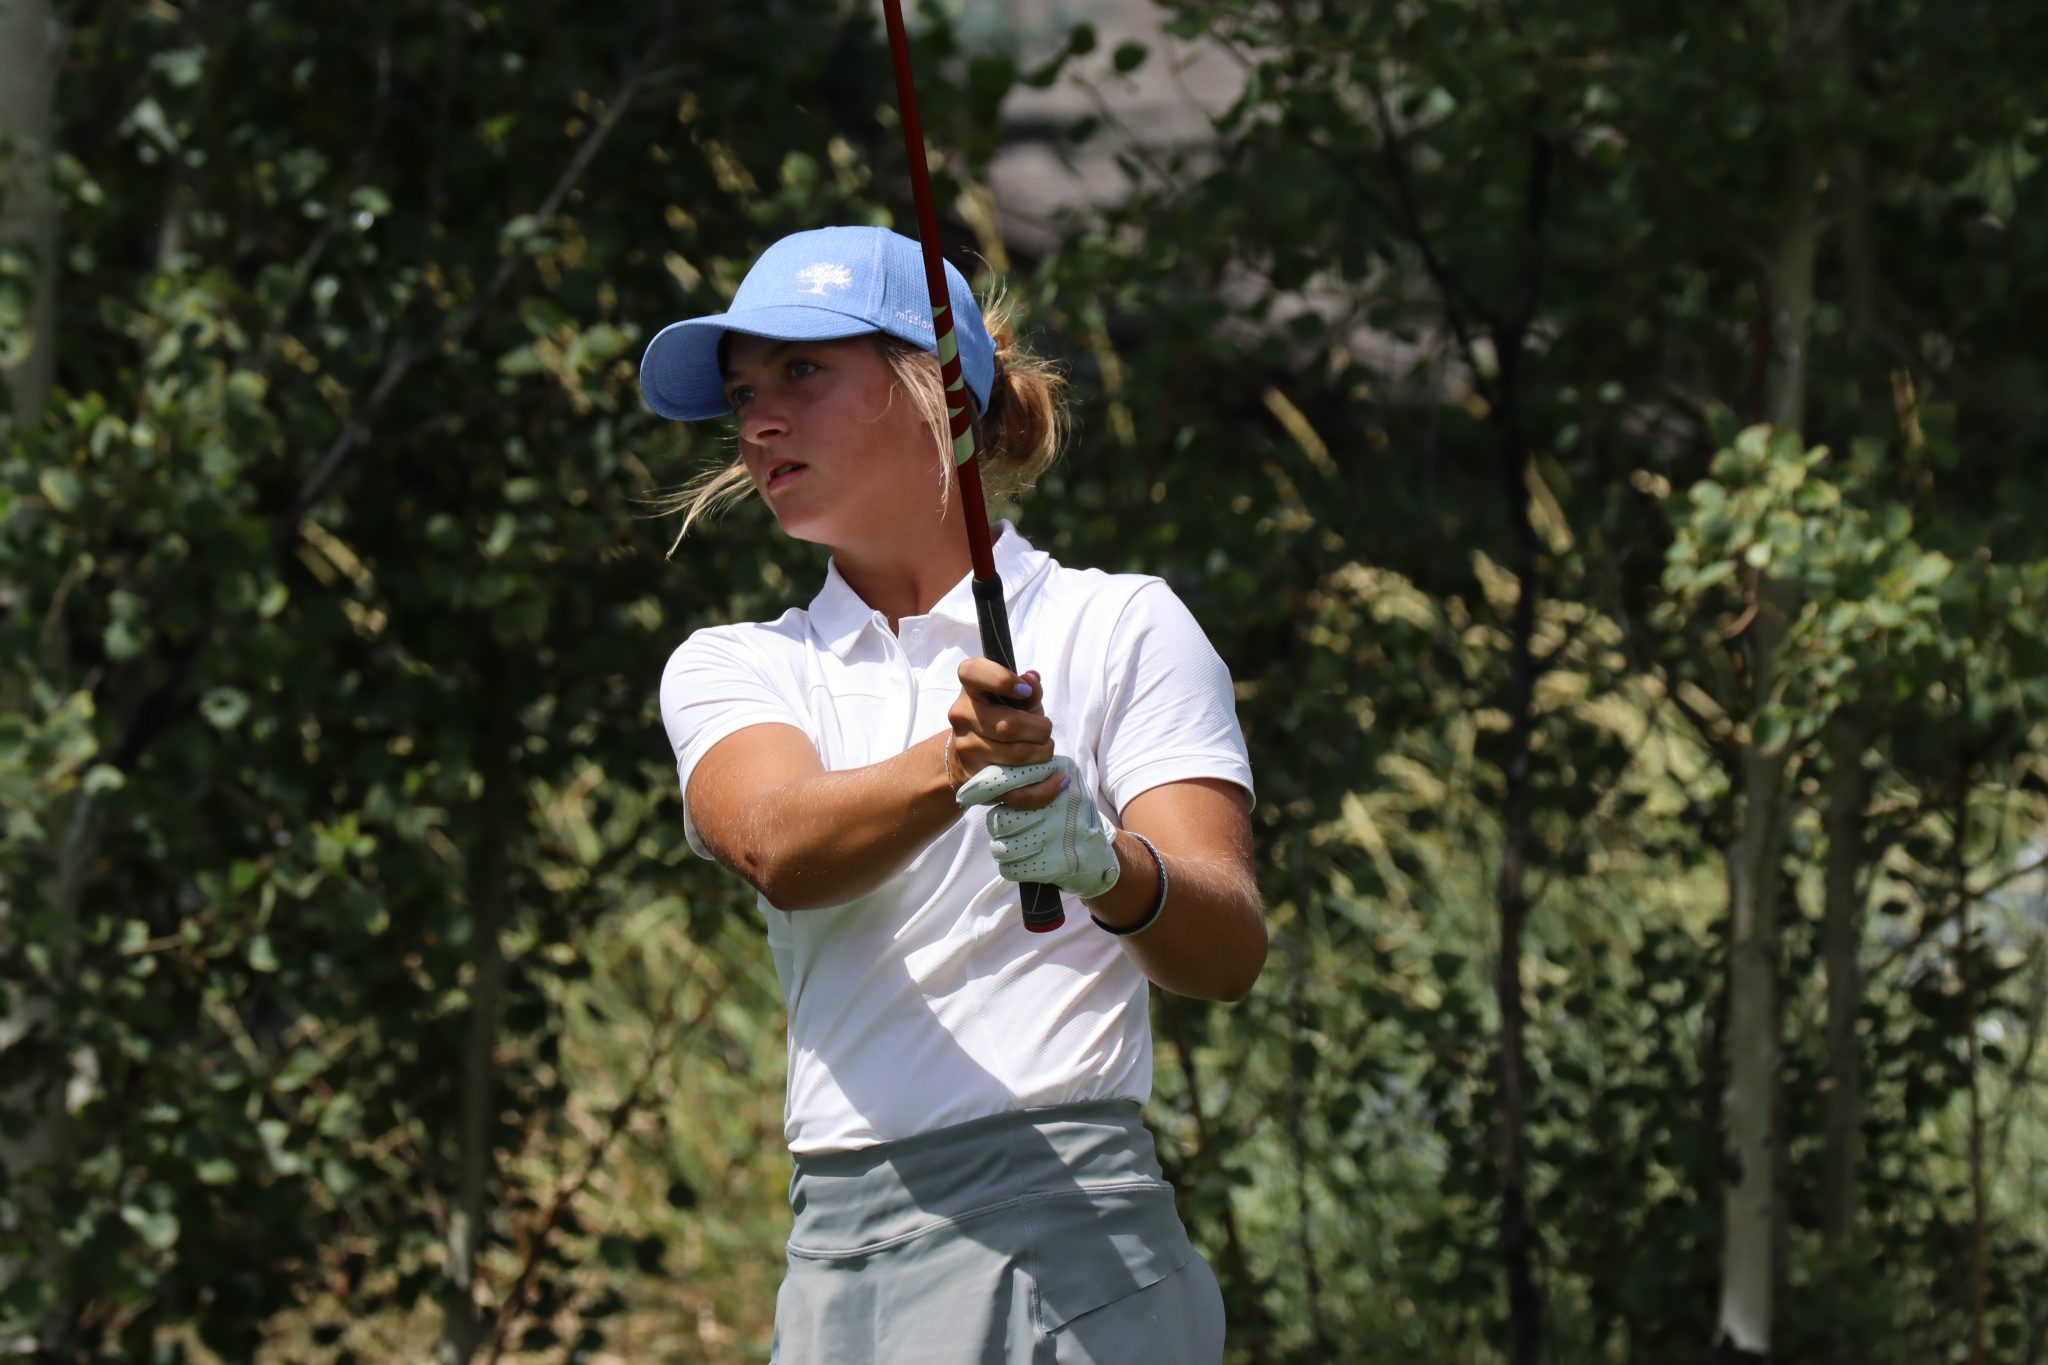 117th Utah Women’s State Amateur: Grace Summerhays is a first-time medalist